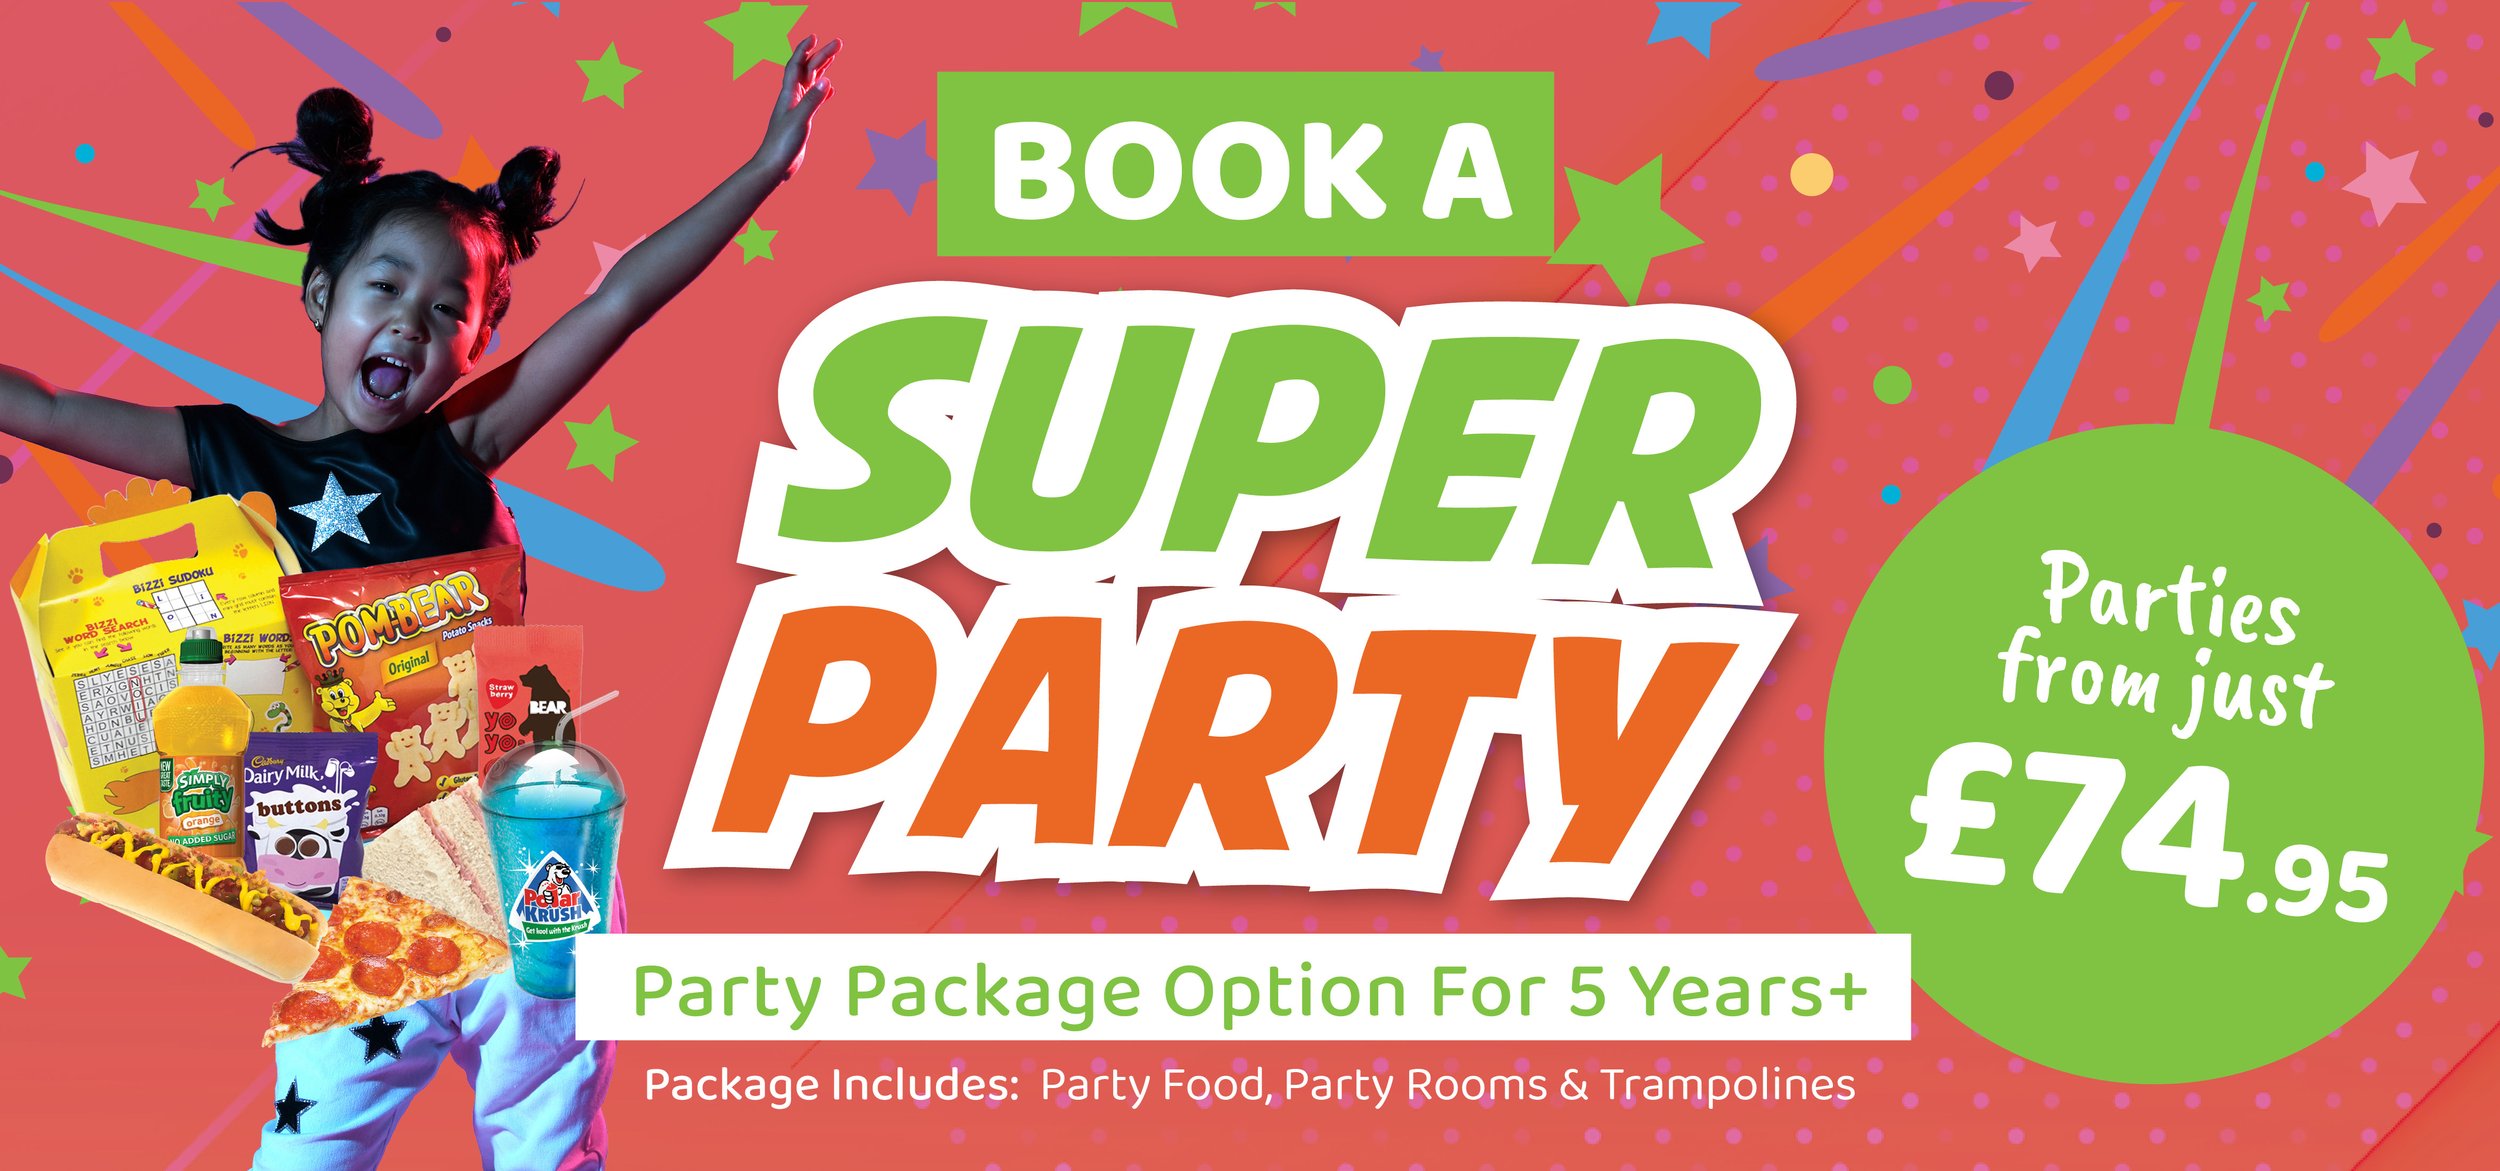 Book A Super Party - Website Banners.jpg